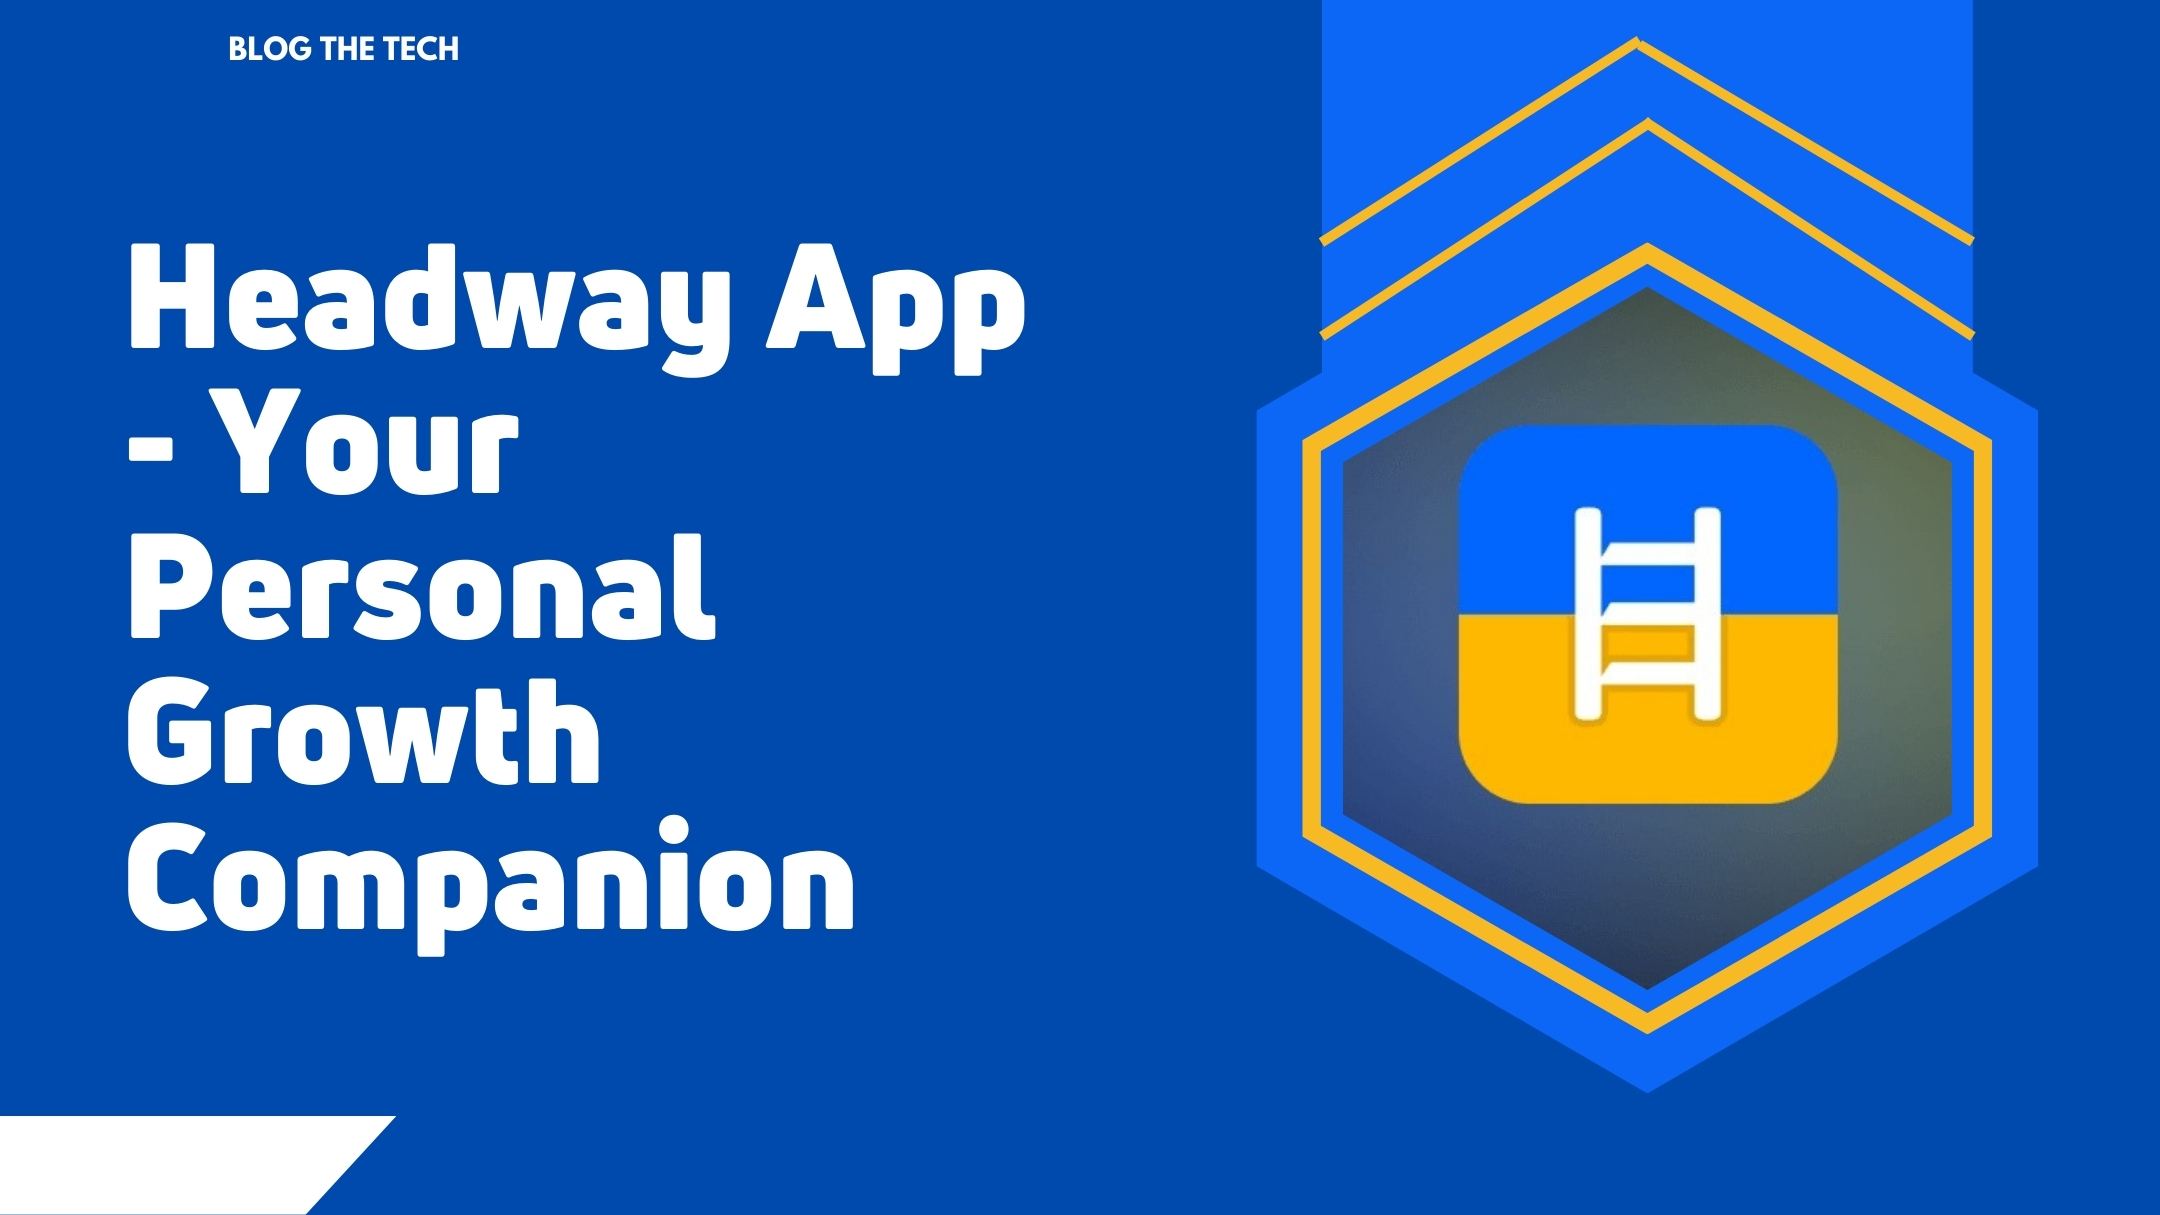 headway-app-your-personal-growth-companion-featured